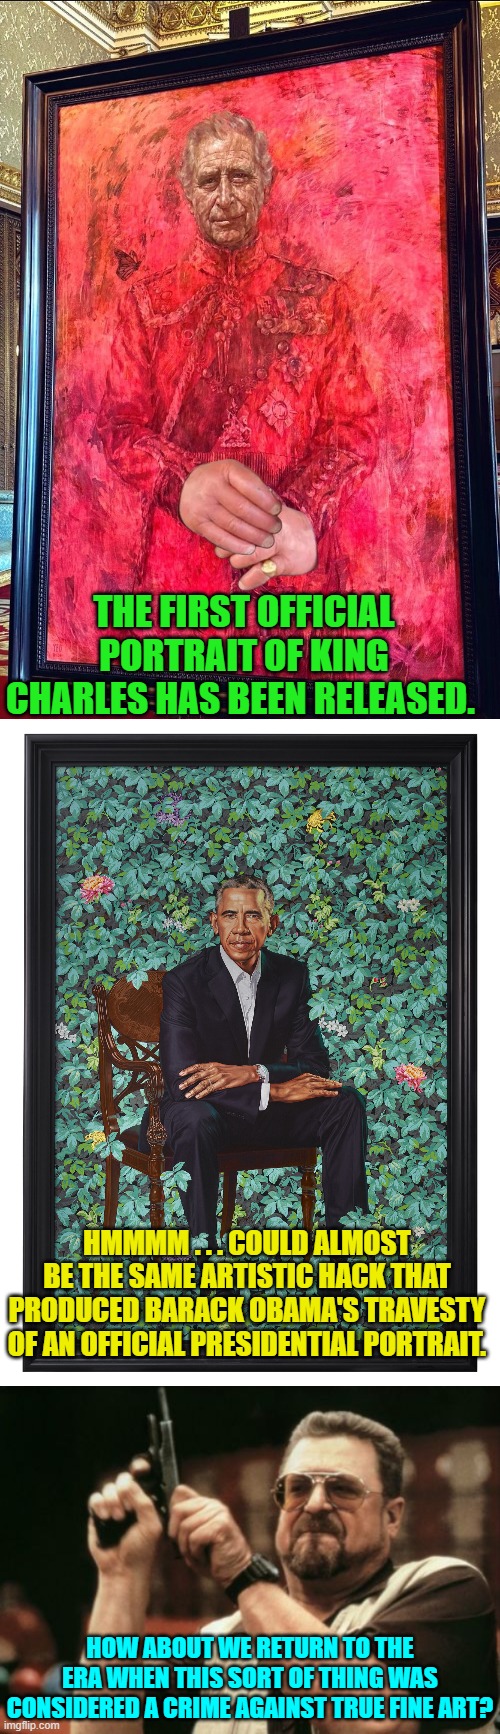 I mean seriously.  Holy crud people! | THE FIRST OFFICIAL PORTRAIT OF KING CHARLES HAS BEEN RELEASED. HMMMM . . . COULD ALMOST BE THE SAME ARTISTIC HACK THAT PRODUCED BARACK OBAMA'S TRAVESTY OF AN OFFICIAL PRESIDENTIAL PORTRAIT. HOW ABOUT WE RETURN TO THE ERA WHEN THIS SORT OF THING WAS CONSIDERED A CRIME AGAINST TRUE FINE ART? | image tagged in yep | made w/ Imgflip meme maker